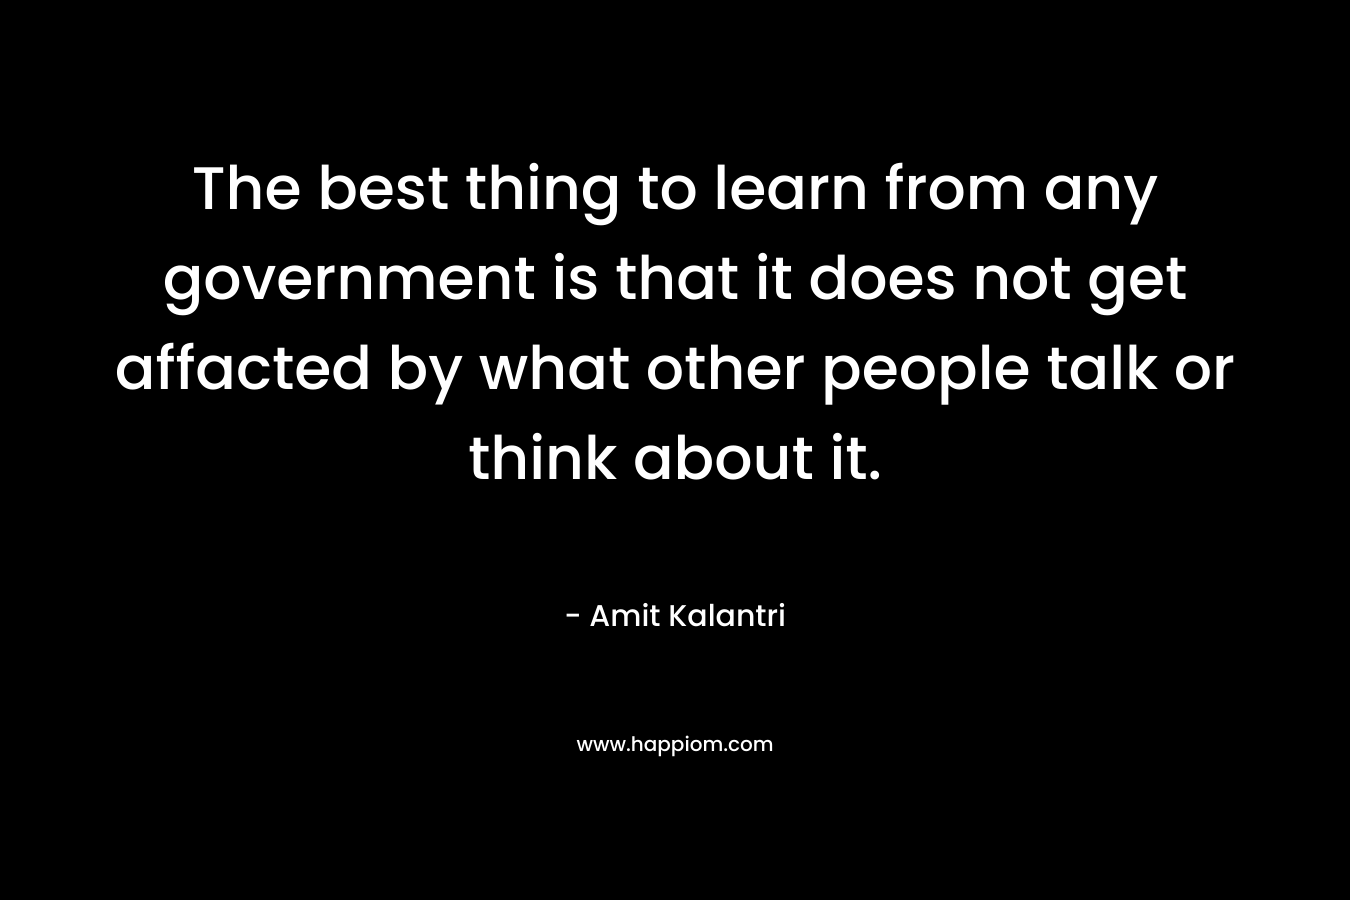 The best thing to learn from any government is that it does not get affacted by what other people talk or think about it.